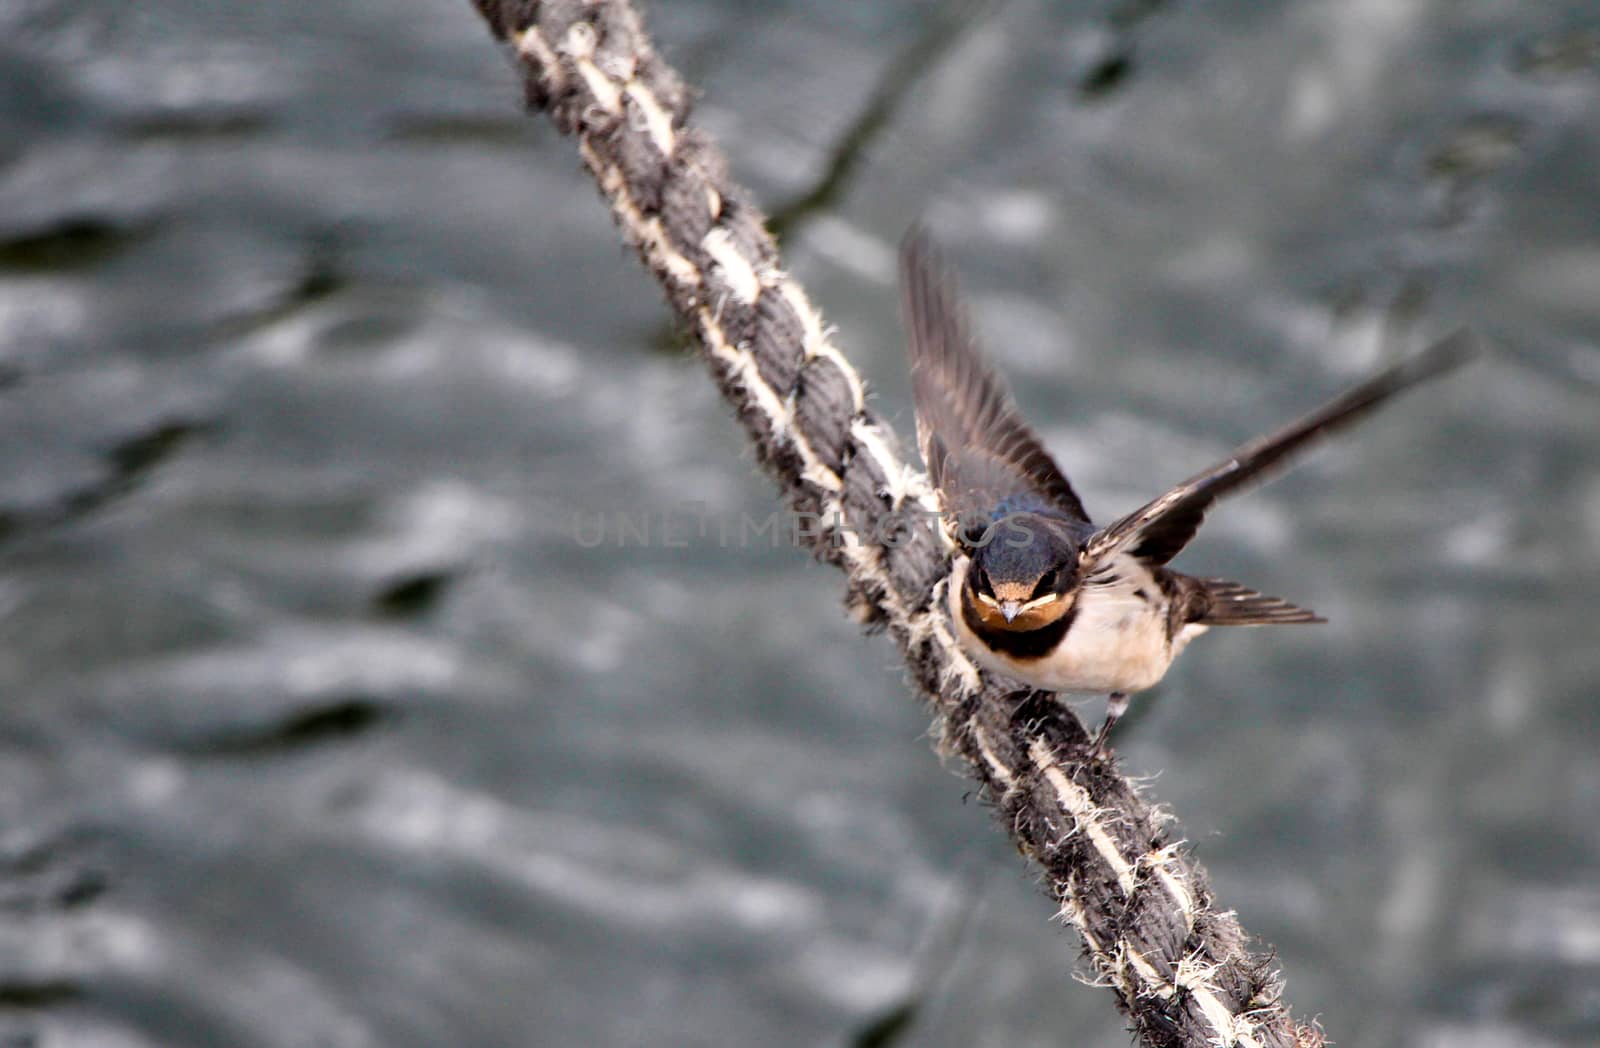 A black and white swallow spreading out its wings on a mooring at a cloudy day.